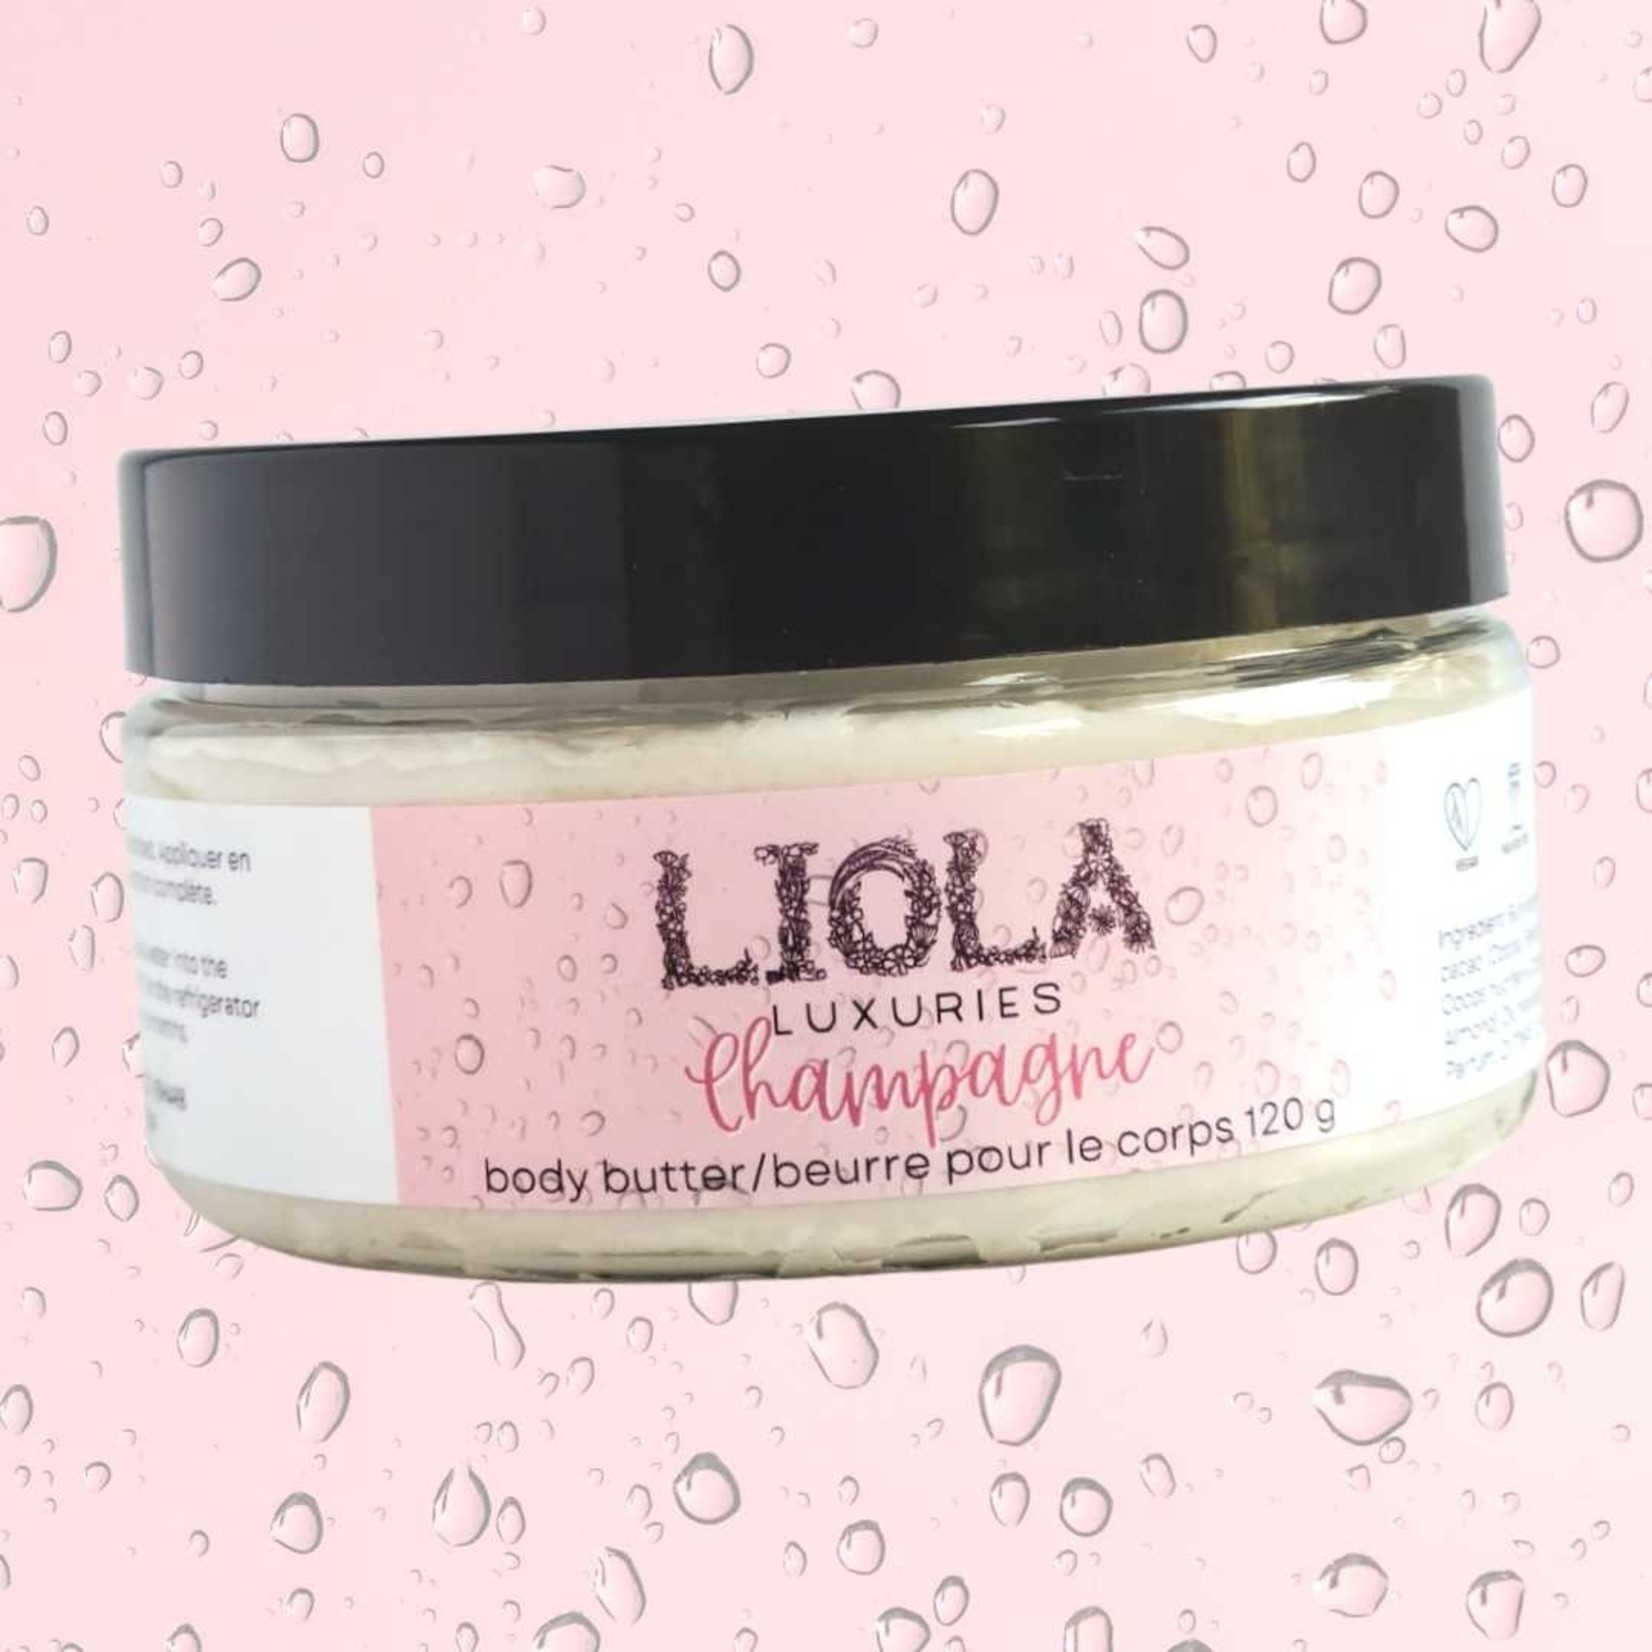 Liola Luxuries Champagne Body Butter 120g